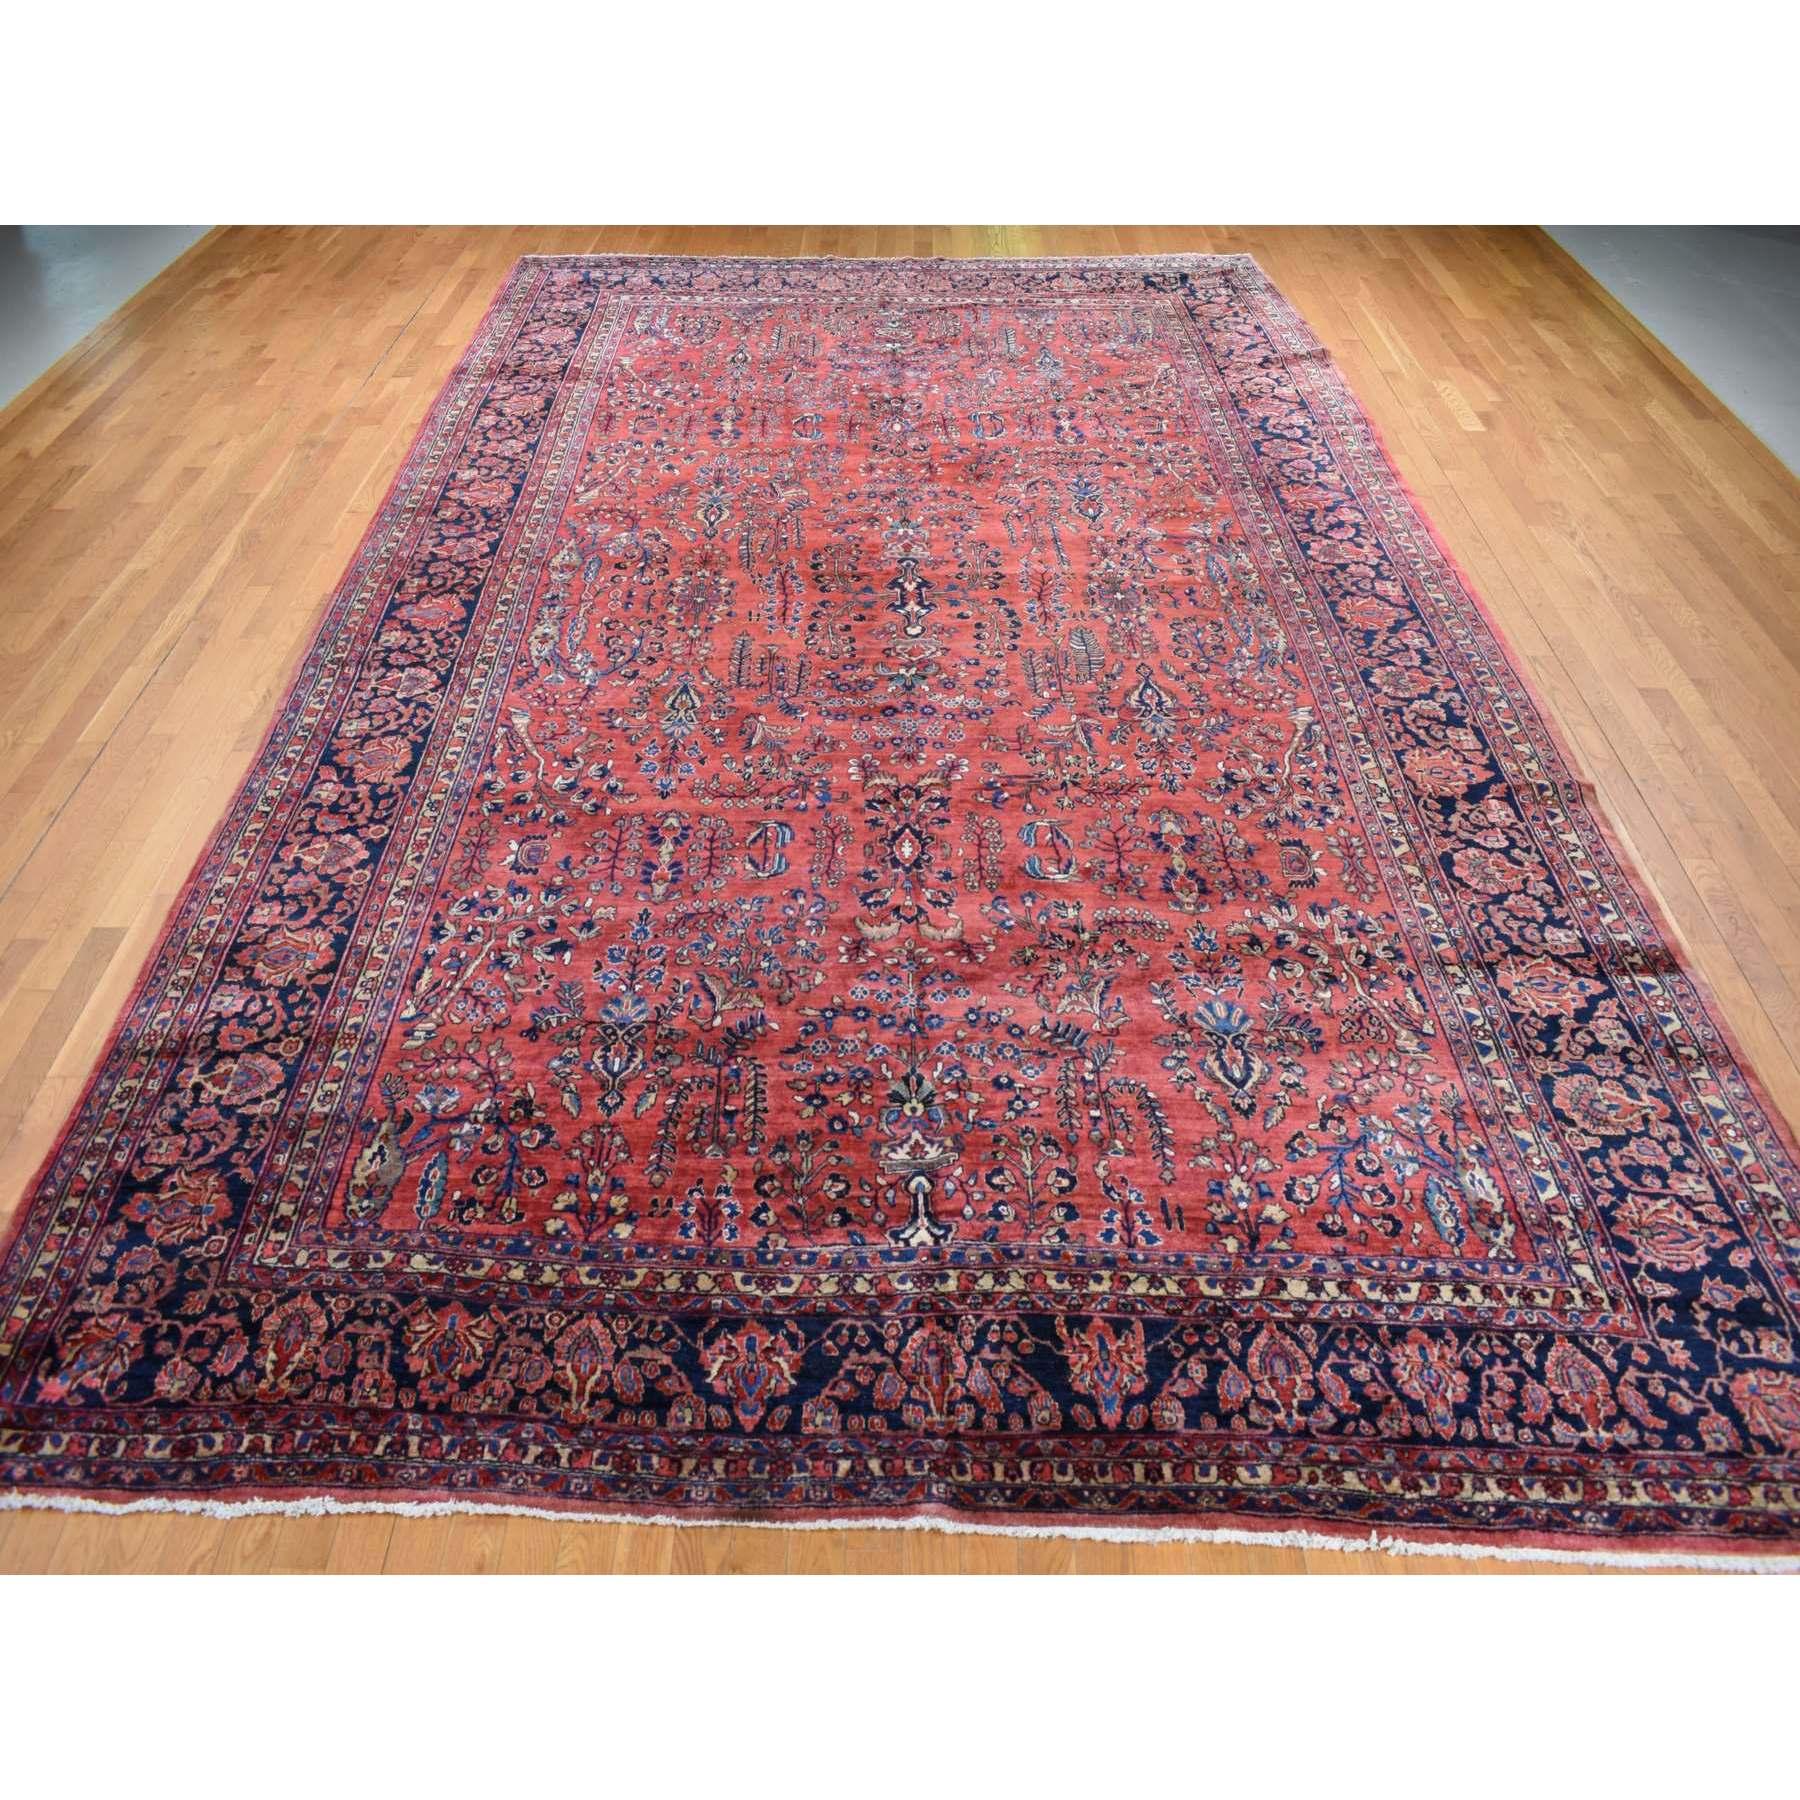 This fabulous Hand-Knotted carpet has been created and designed for extra strength and durability. This rug has been handcrafted for weeks in the traditional method that is used to make
Exact Rug Size in Feet and Inches : 10'8